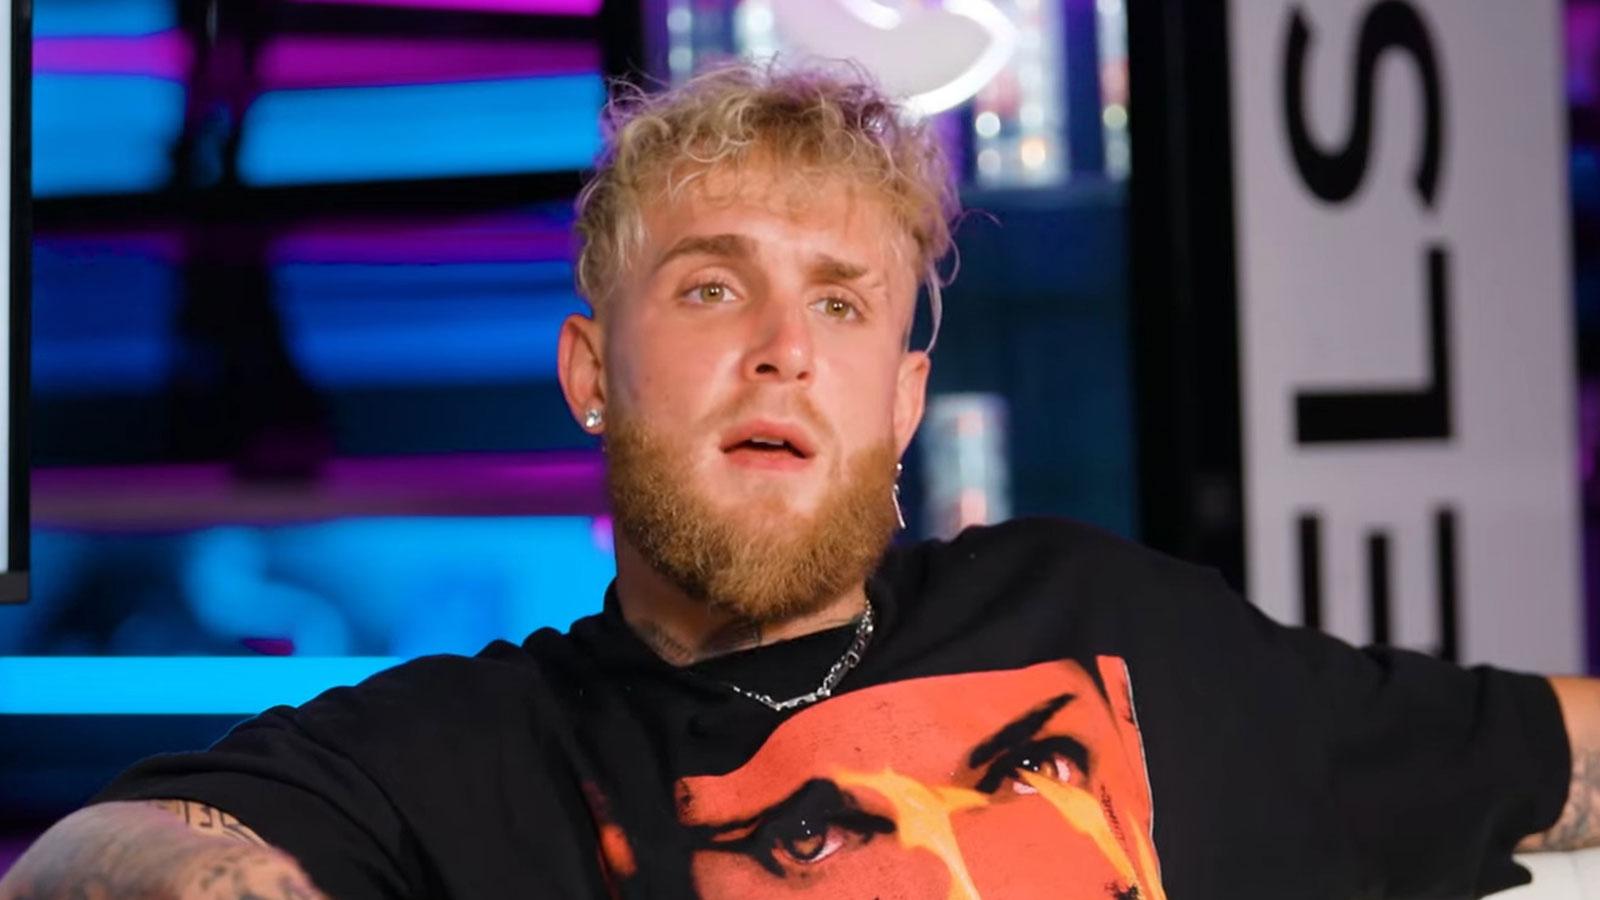 Jake Paul sat relaxing on couch on set of BS w/ Jake Paul